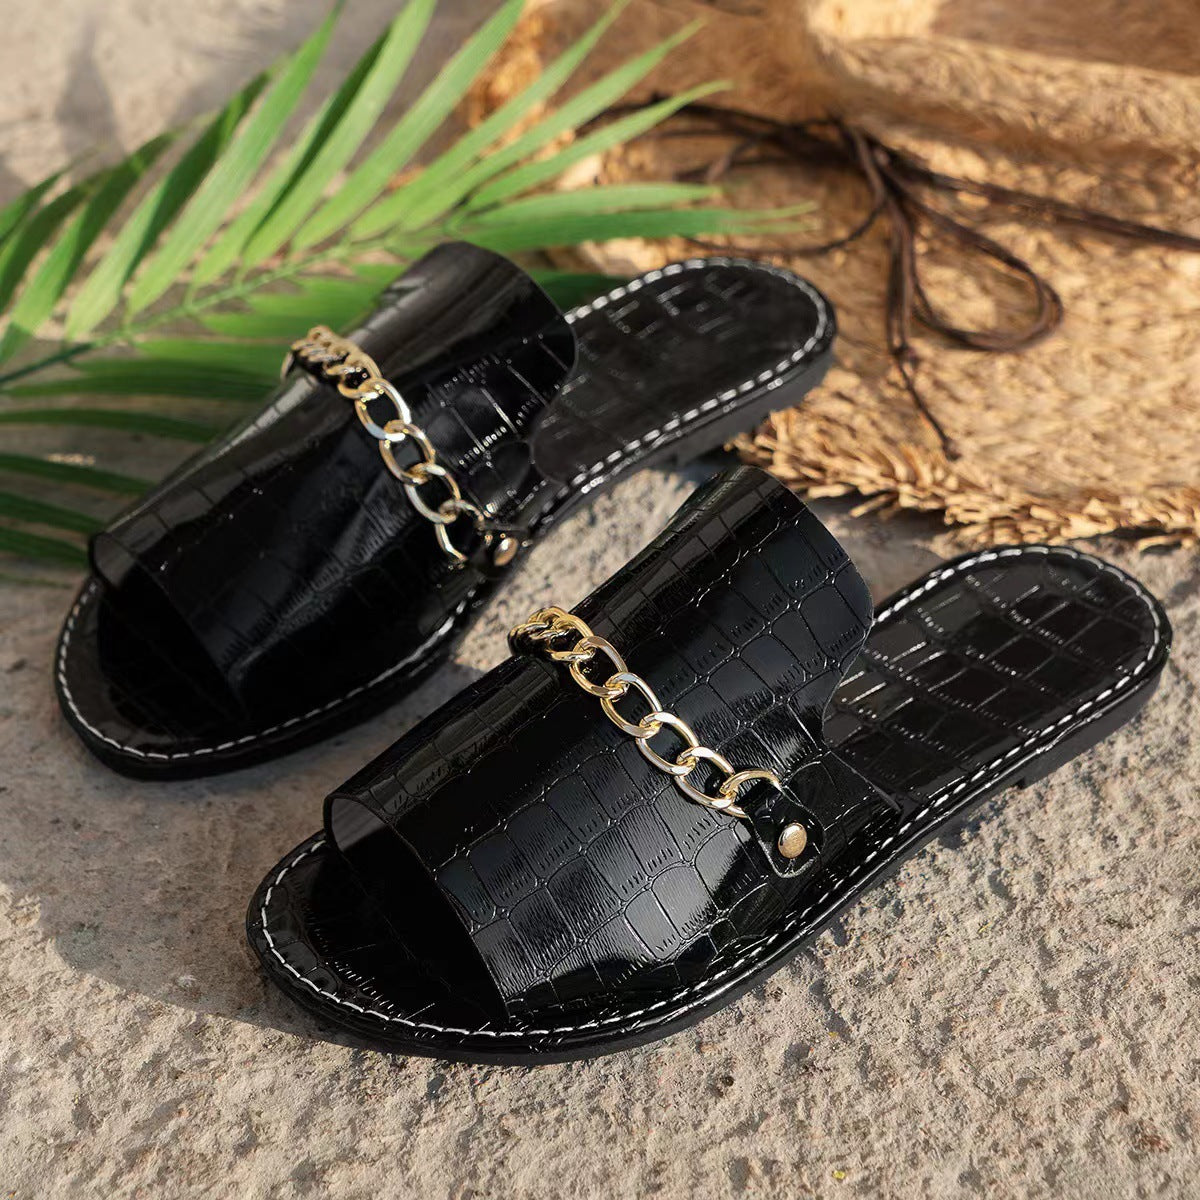 Pattern Chains Sandals Summer Fish Mouth Flat Slides Shoes Women Casual Vacation Beach Slippers - ZENICO